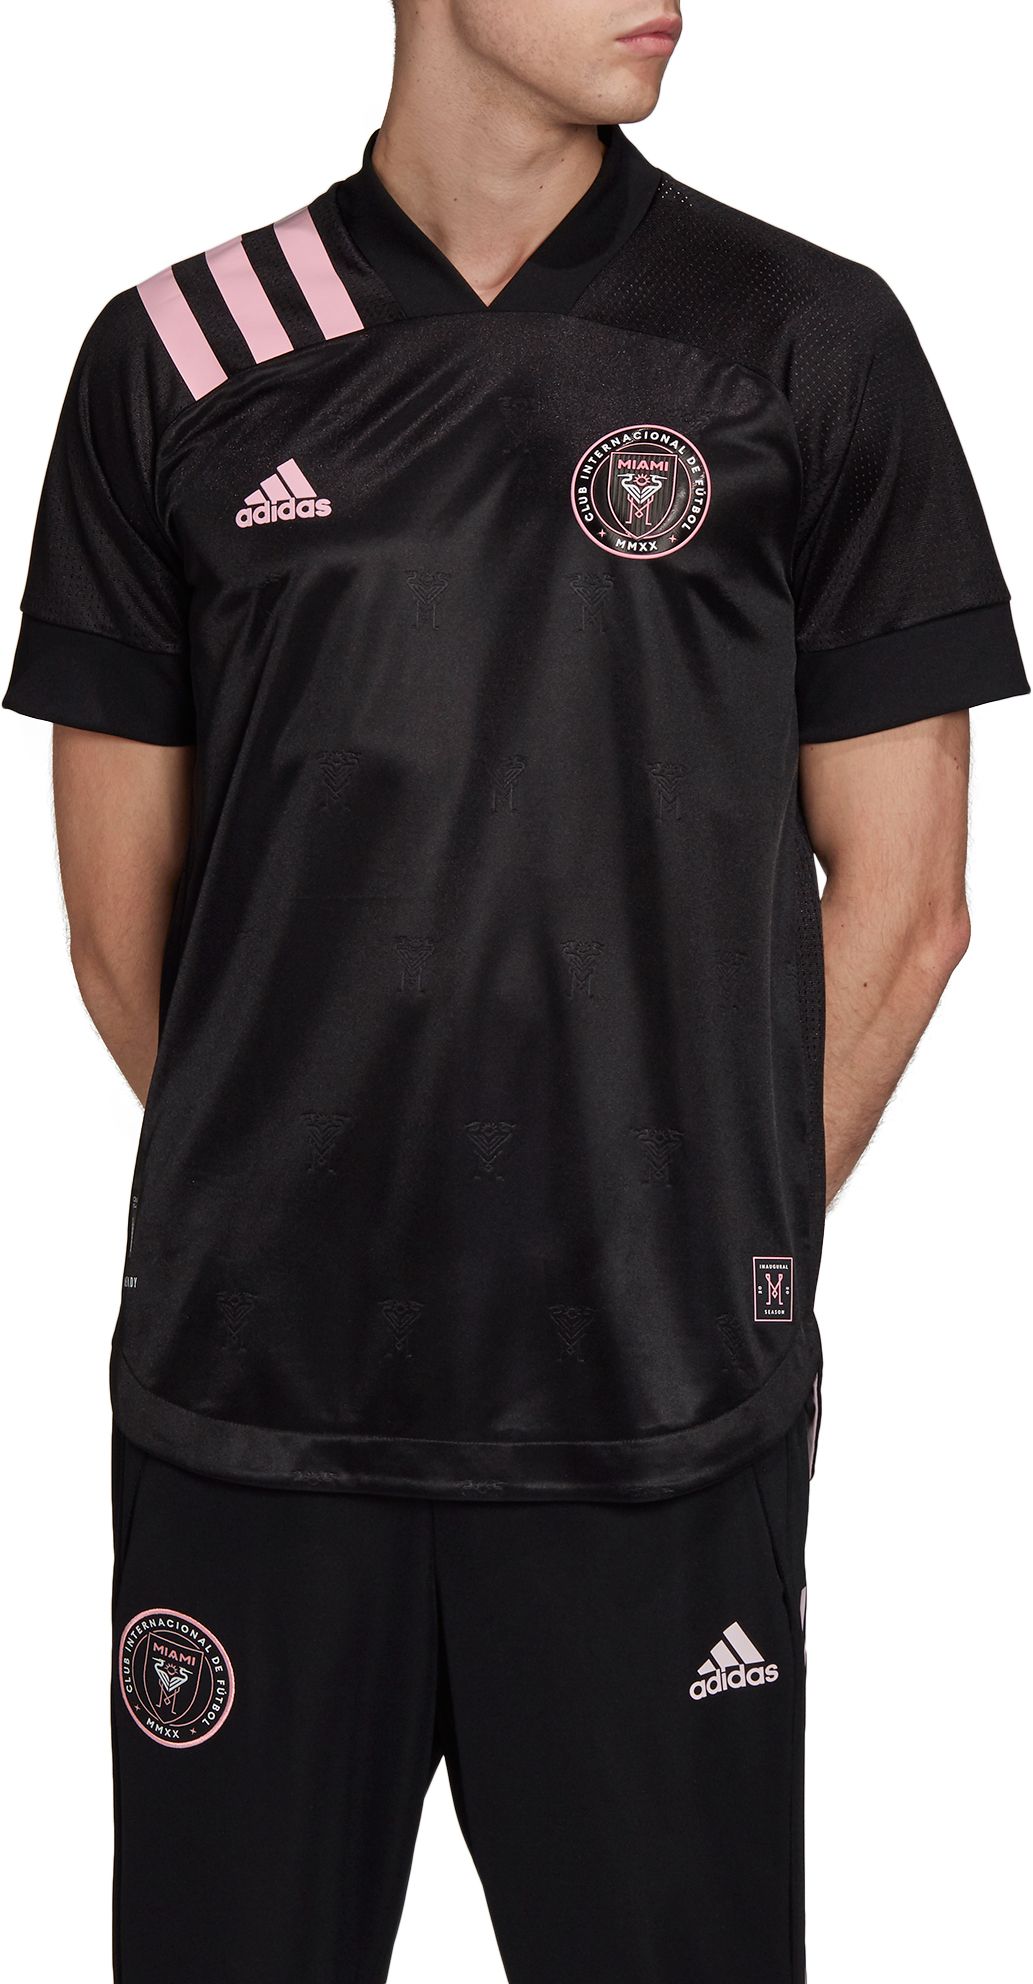 inter miami official jersey